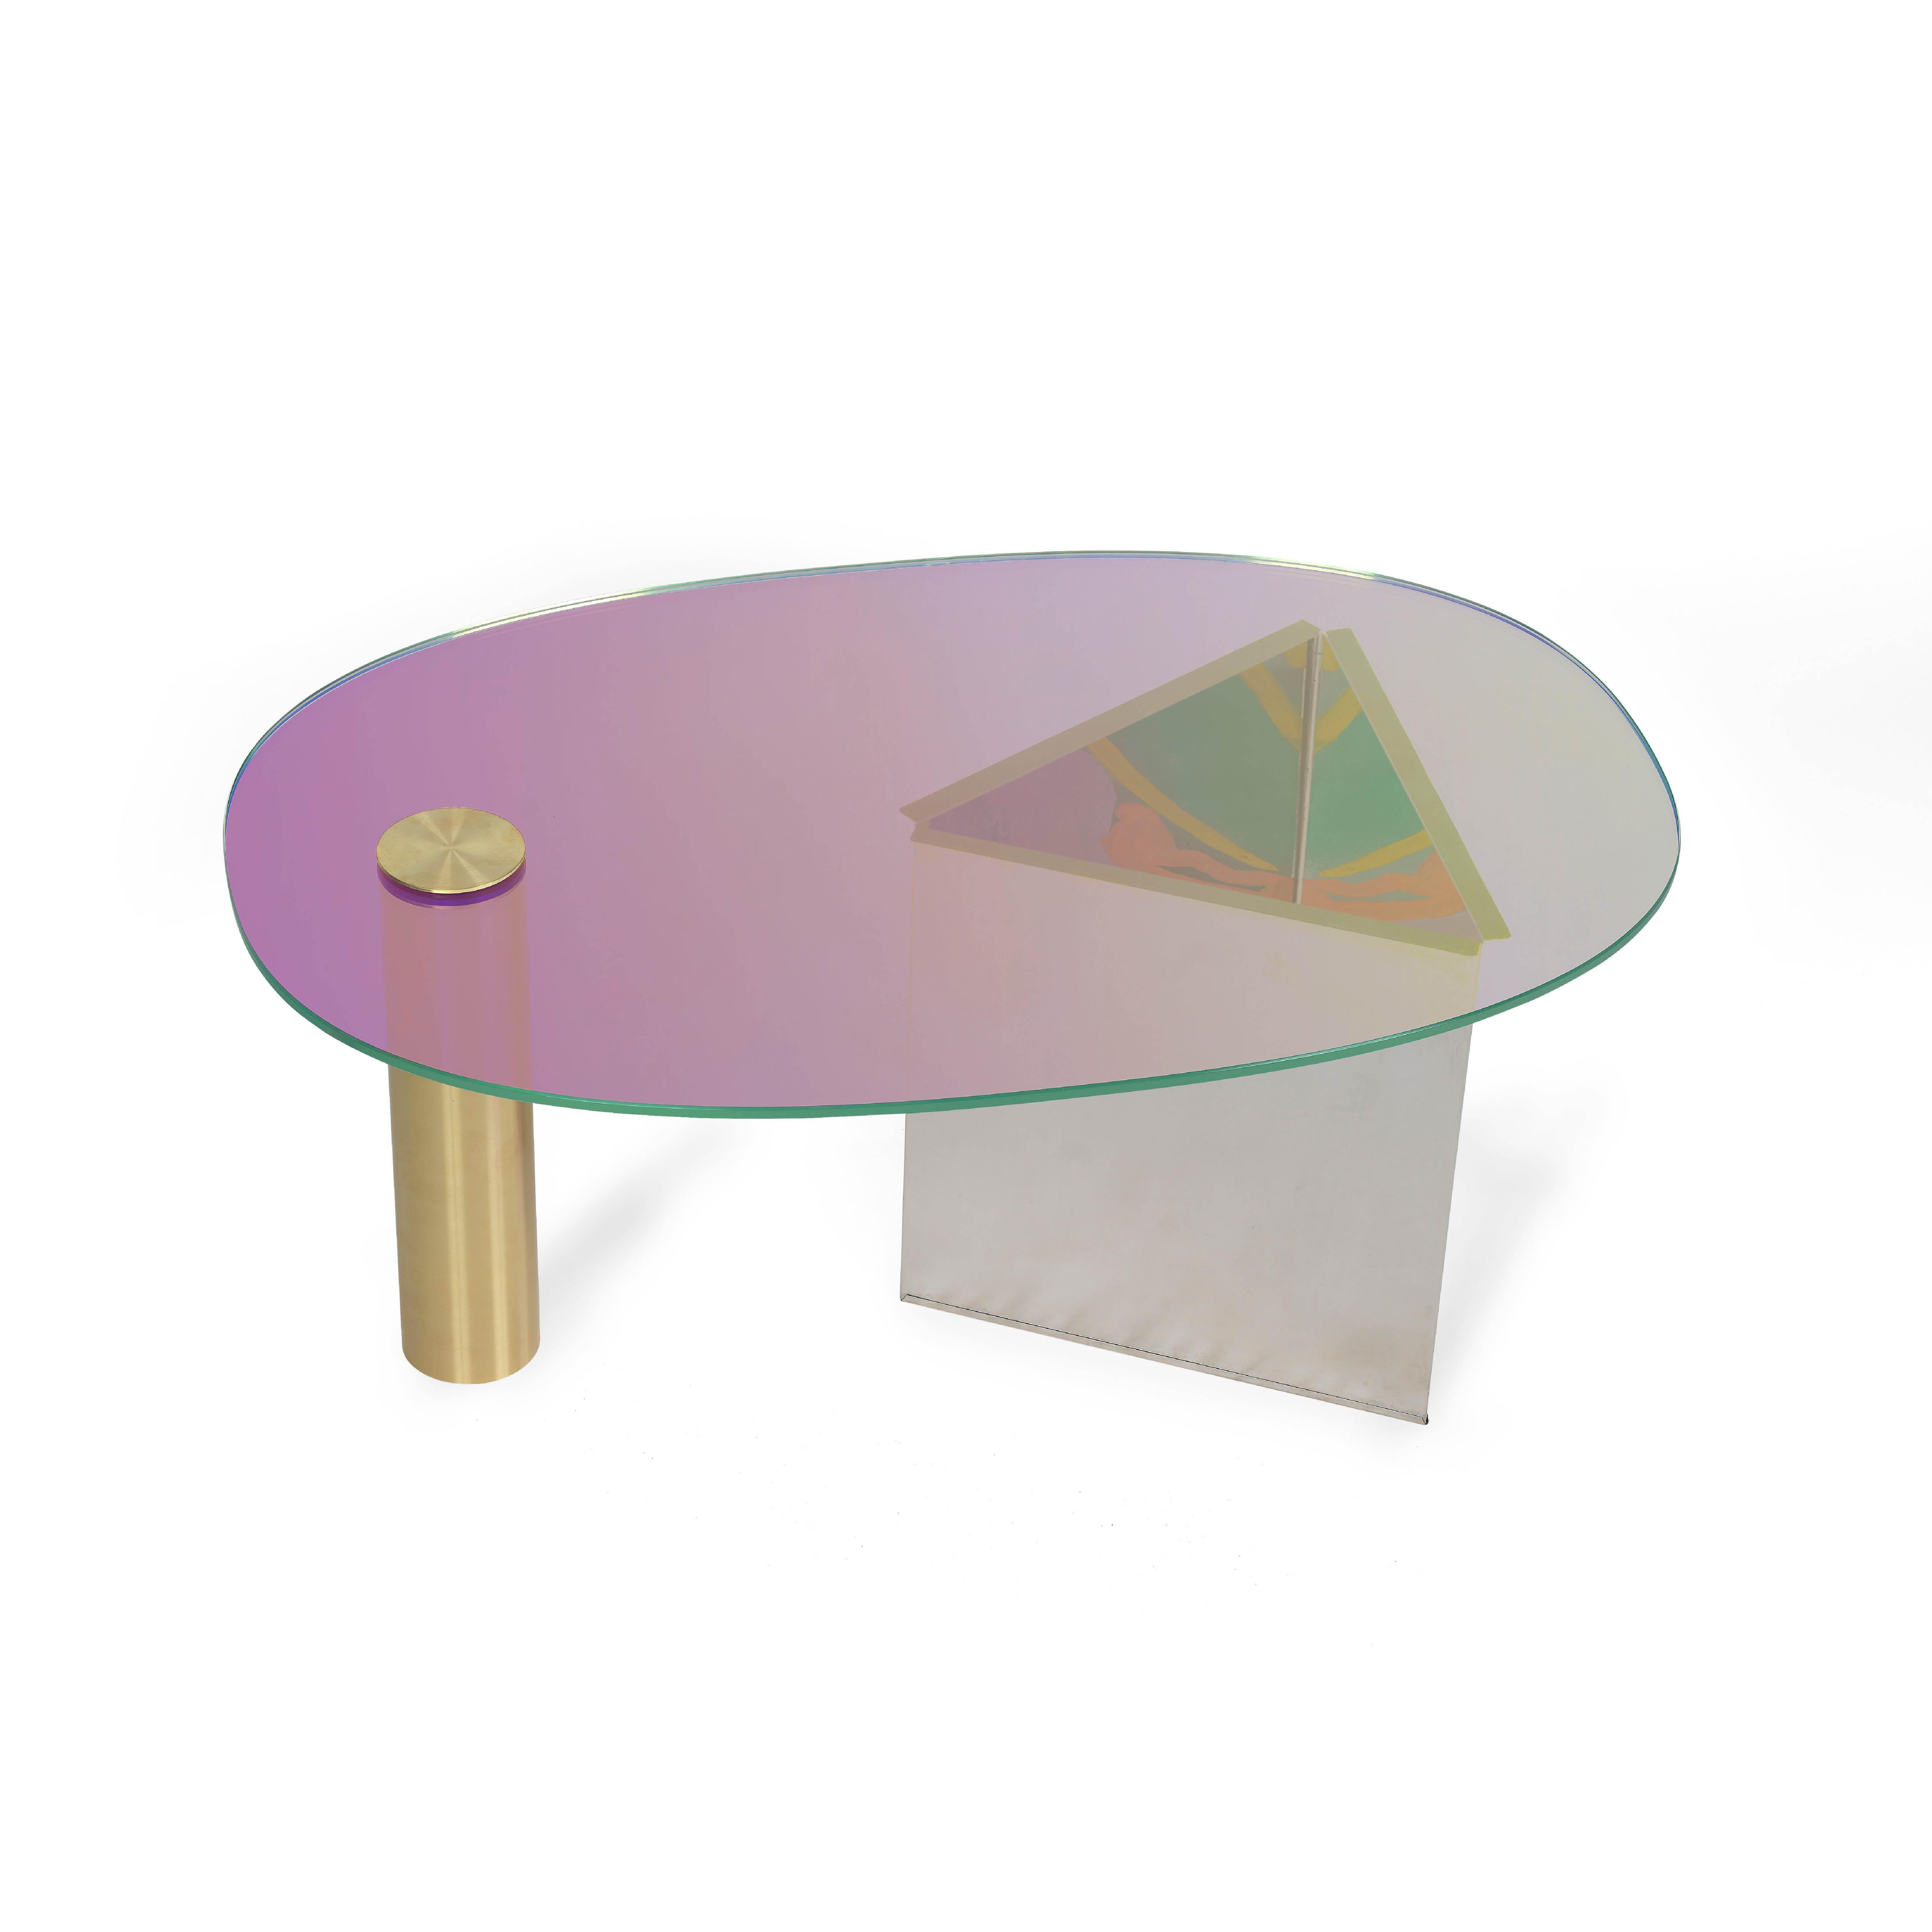 Ettore purple coffee table by Asa Jungnelius
Dimensions: 43 x 67 x 100 cm
Materials: Dichroic glass, brass and stainless steel.

Each table is individually painted by the artist. Limited edition

Åsa Jungnelius is a visual artist (MFA) and a